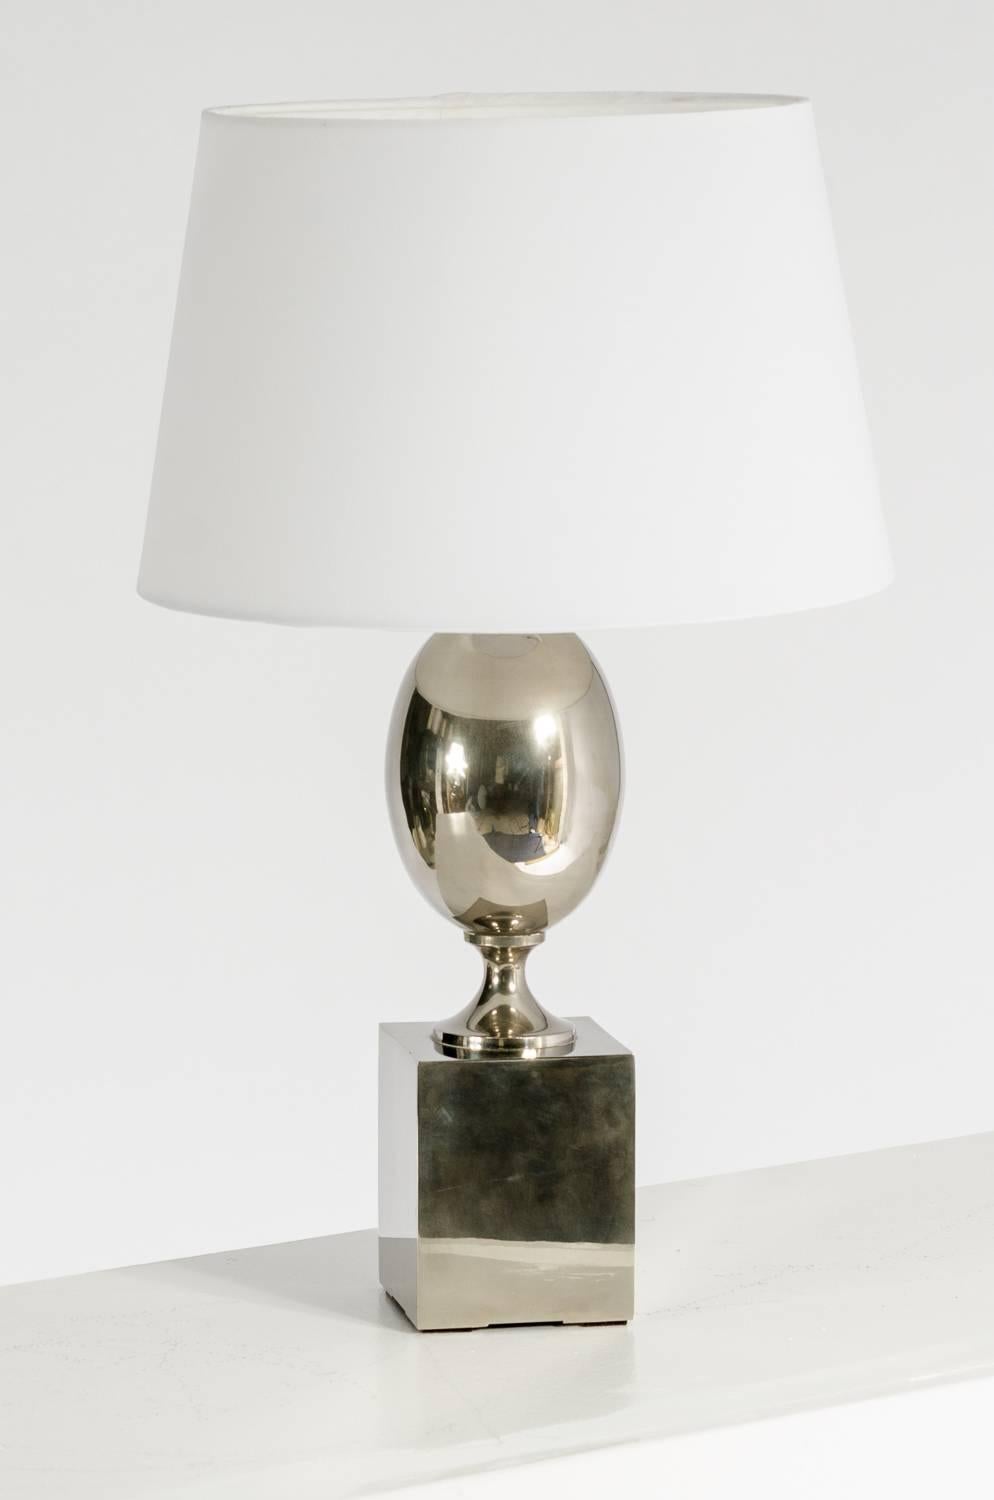 Table lamp by Jaqcues Barbier in perfect condition and original condition, dimension are without the shade. The lamp is Stamped Barbier.